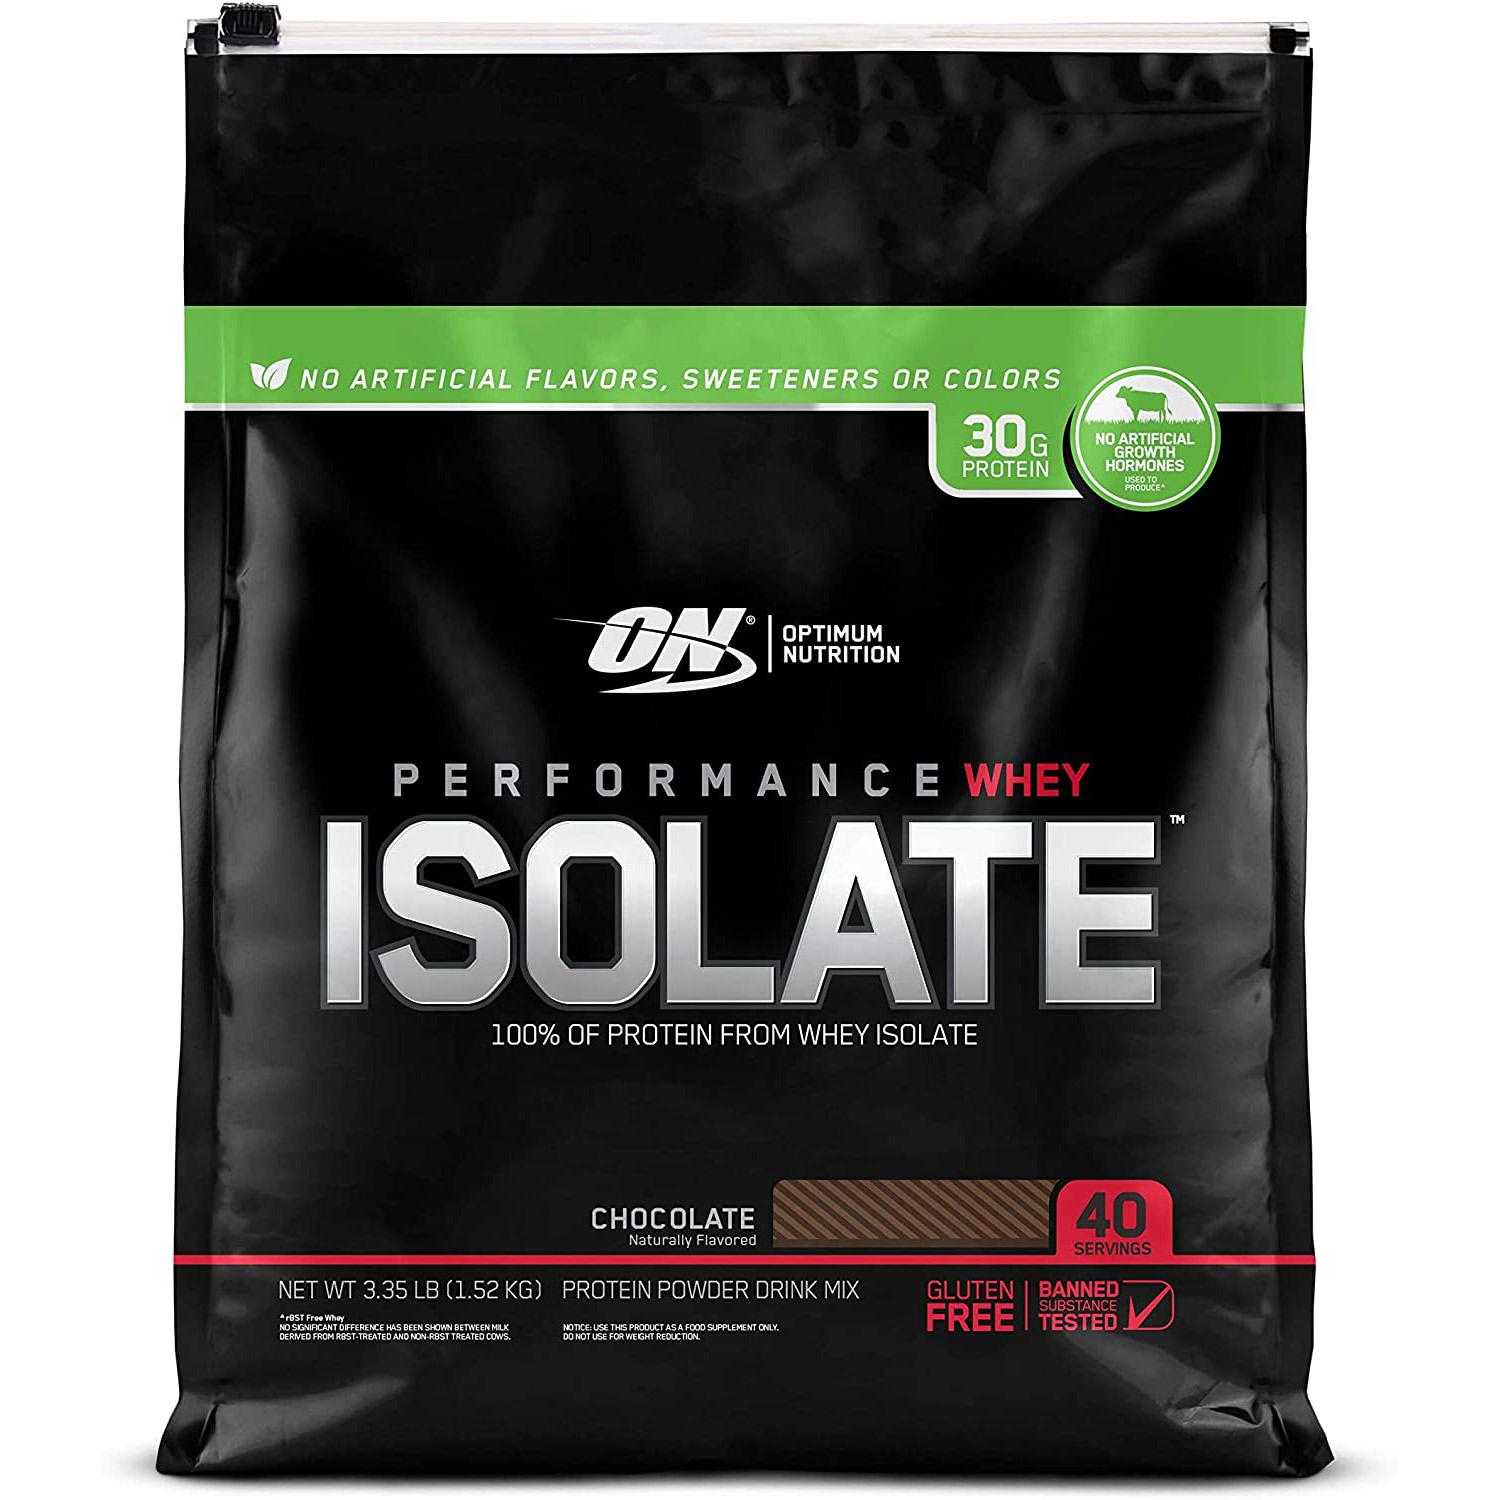 3.35-lbs Optimum Nutrition Performance Whey Isolate Protein Powder for $24.99